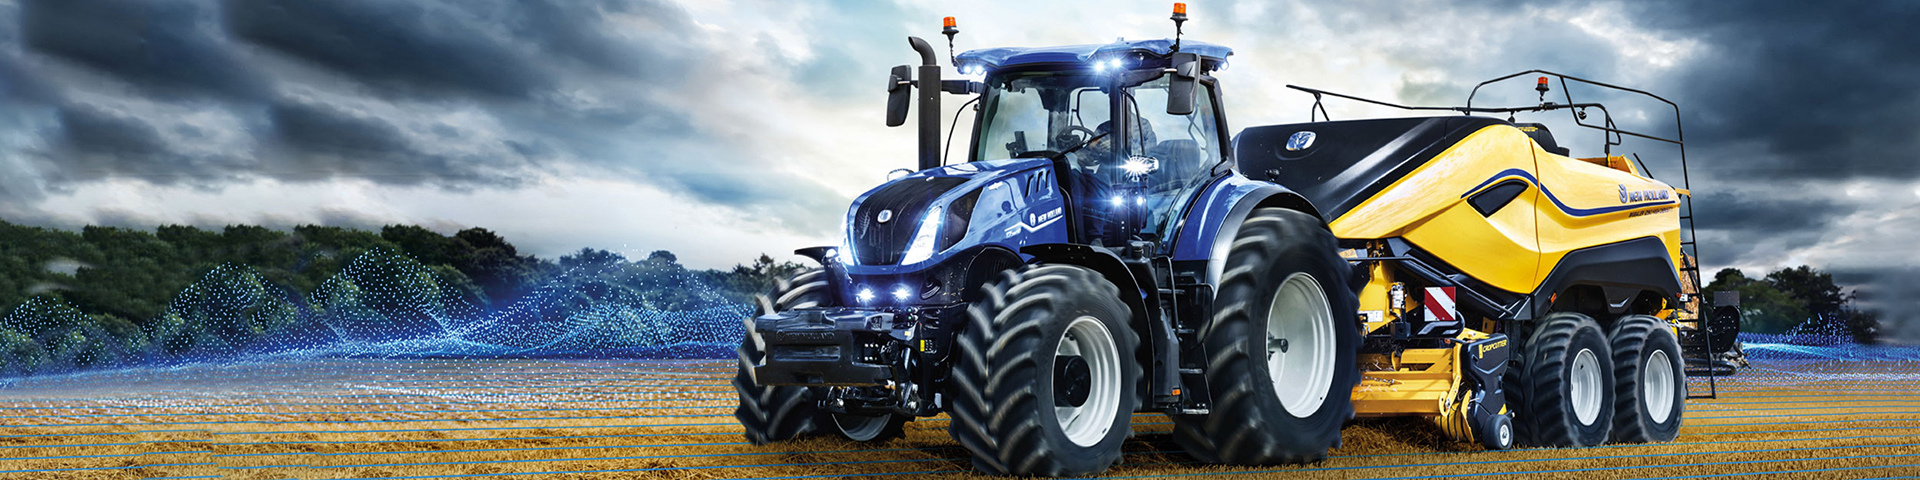 Offres et promotions New Holland